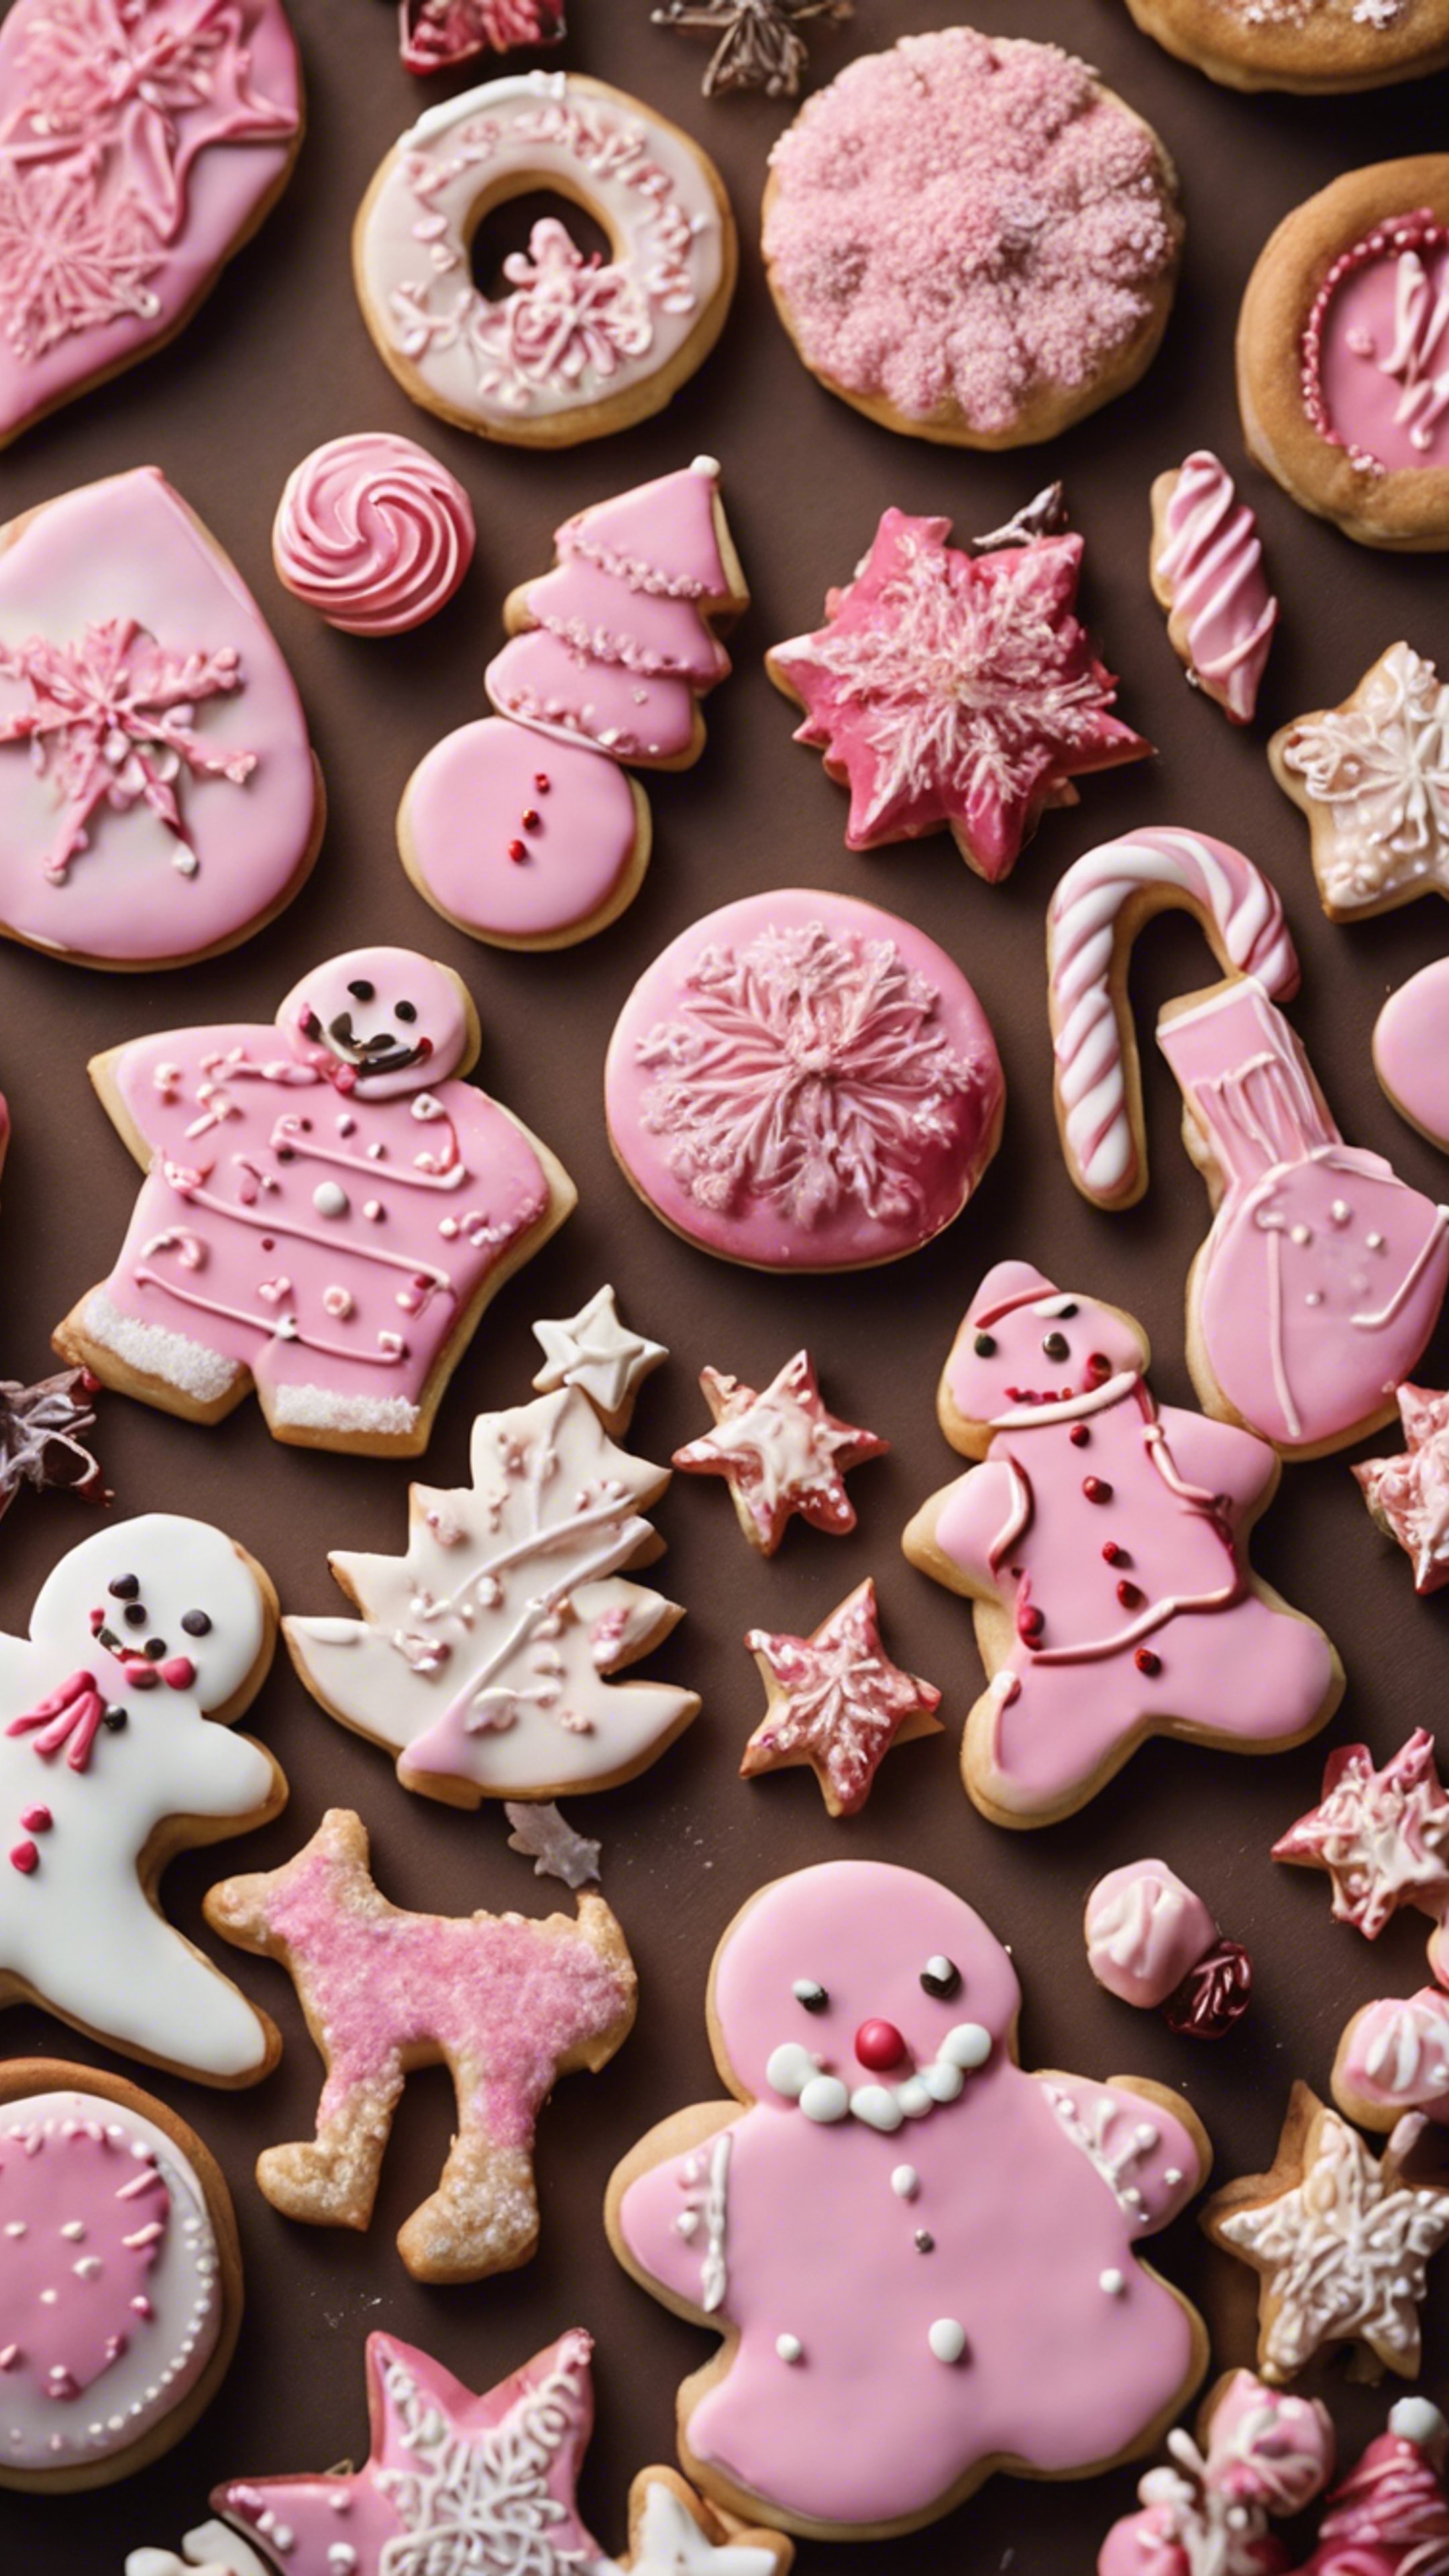 Various types of pink Christmas cookies and sweets laid on a table with festive decorations. Tapeta[bb72647e6a9944a5b5aa]